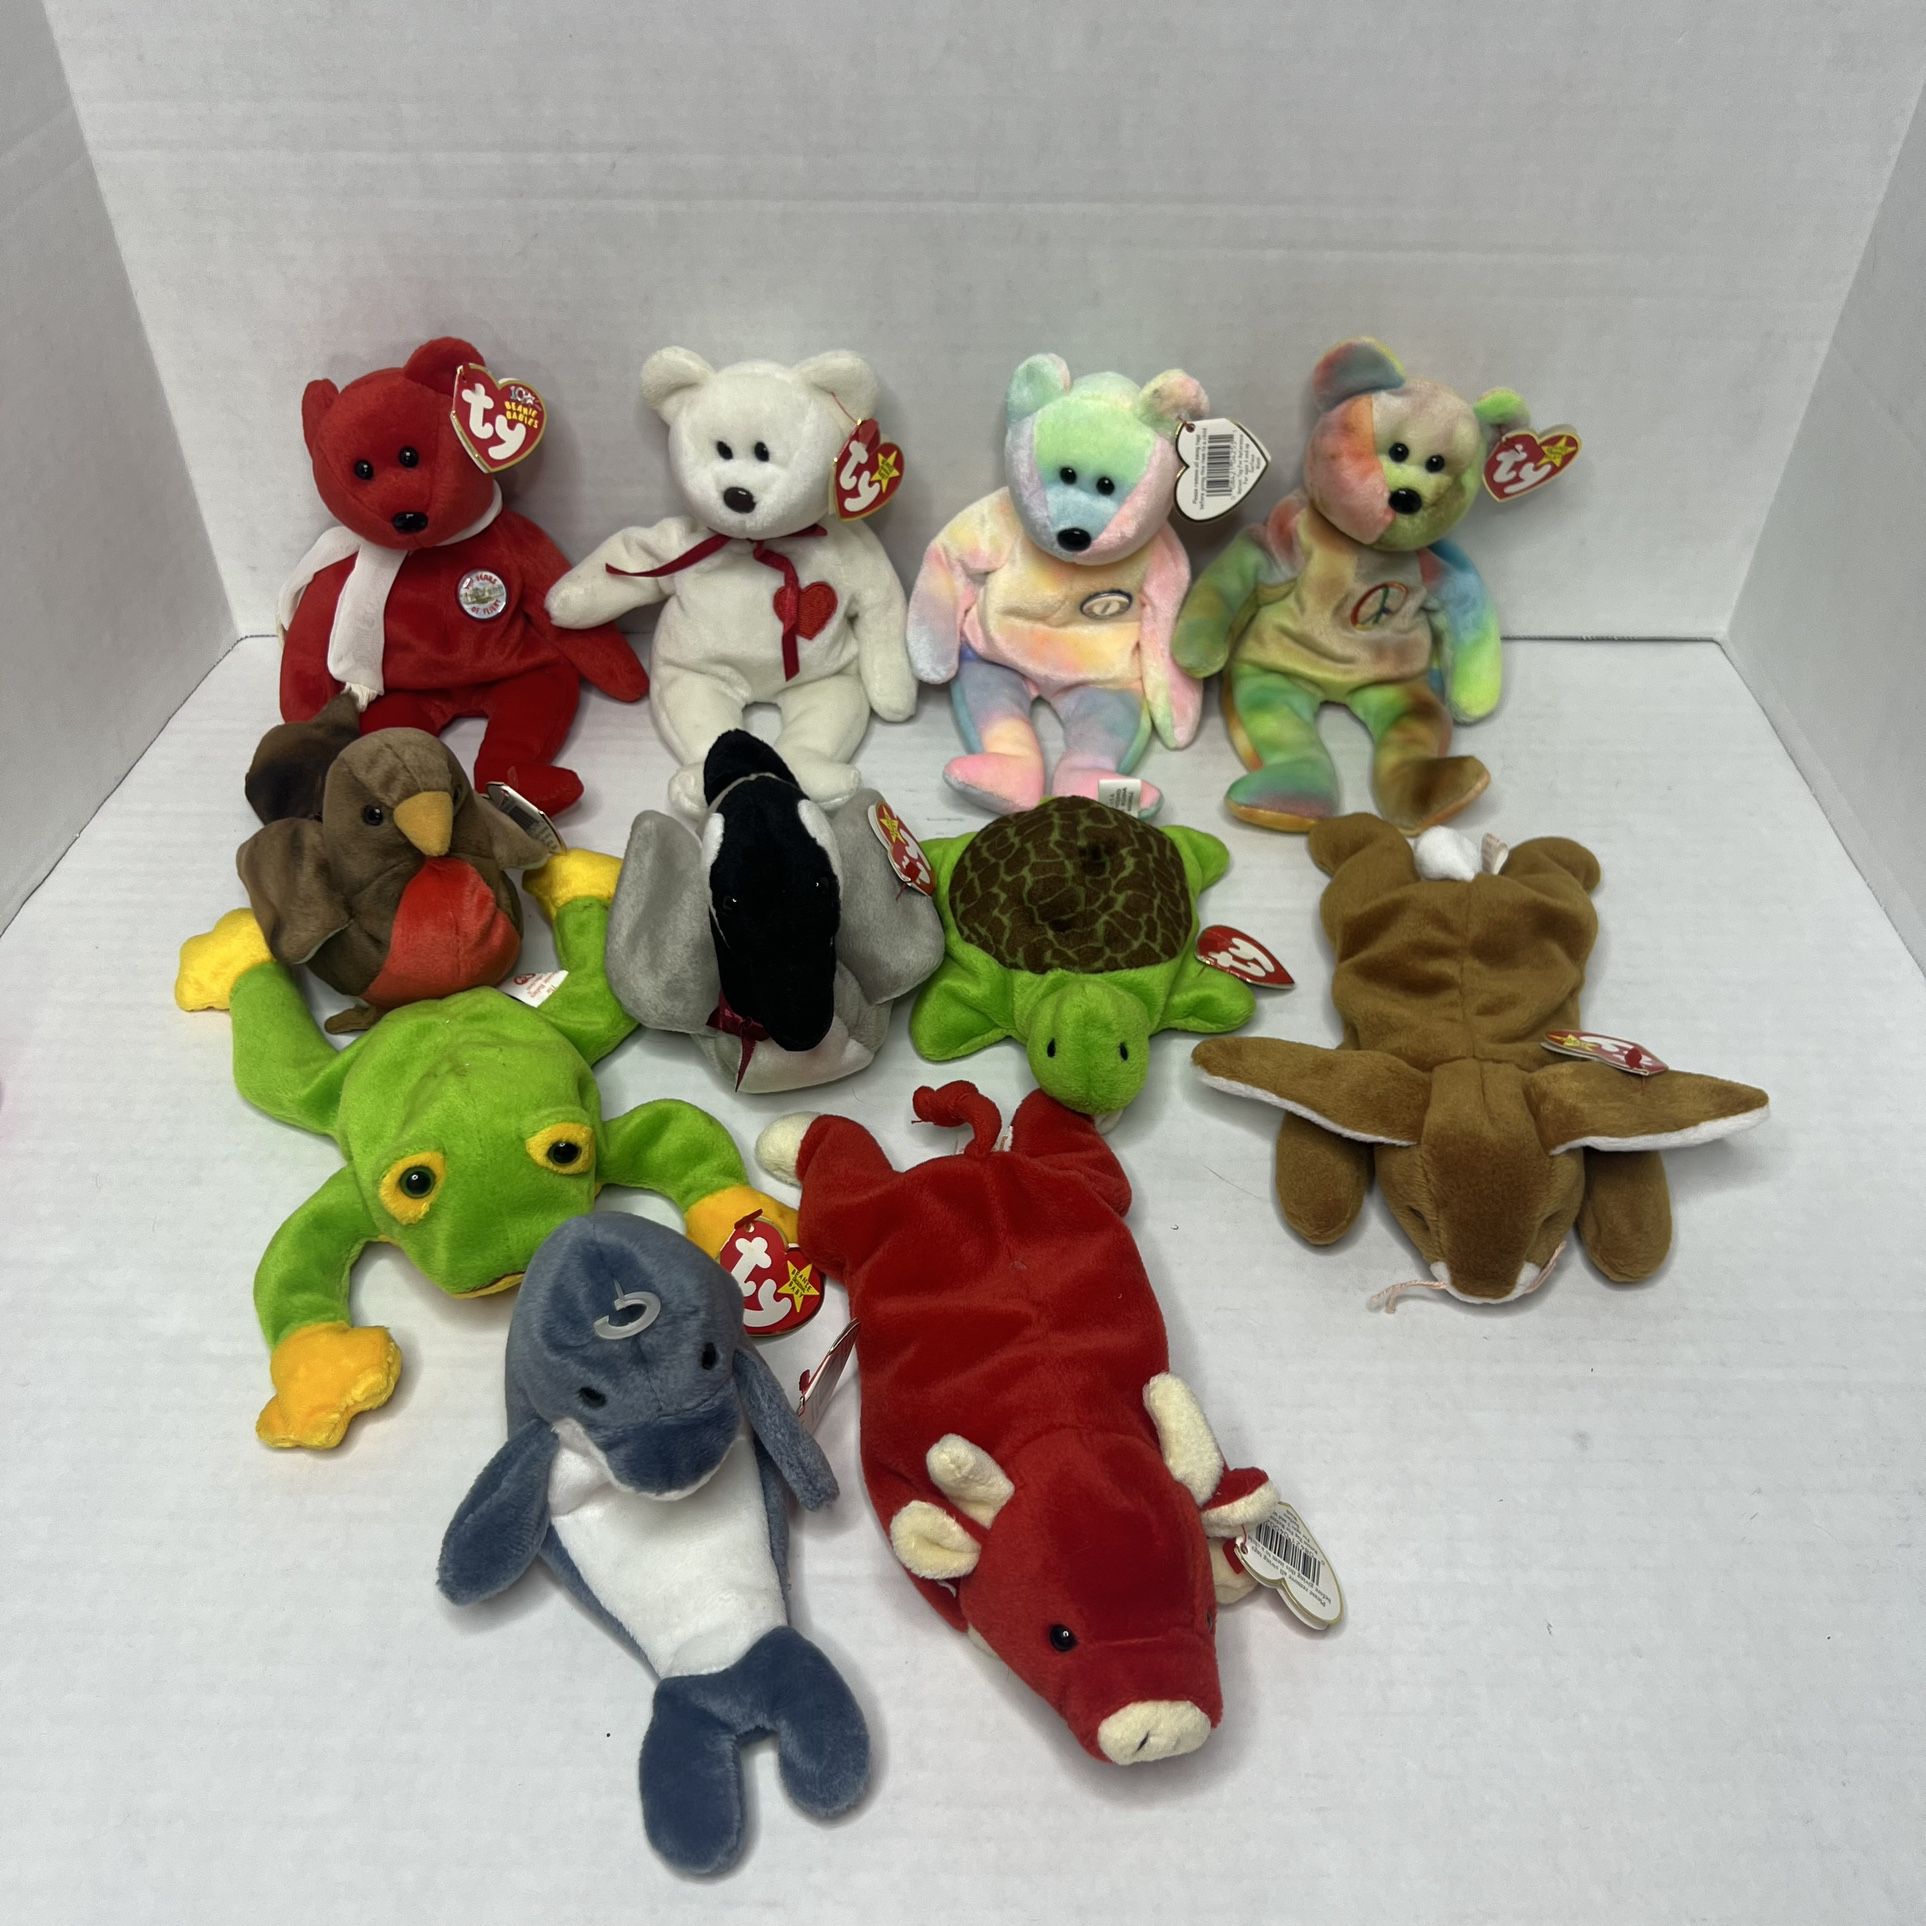 Huge Lot Of 27 Beenie Babies 1(contact info removed) Patti Legs Rare Collectible peace the bear.